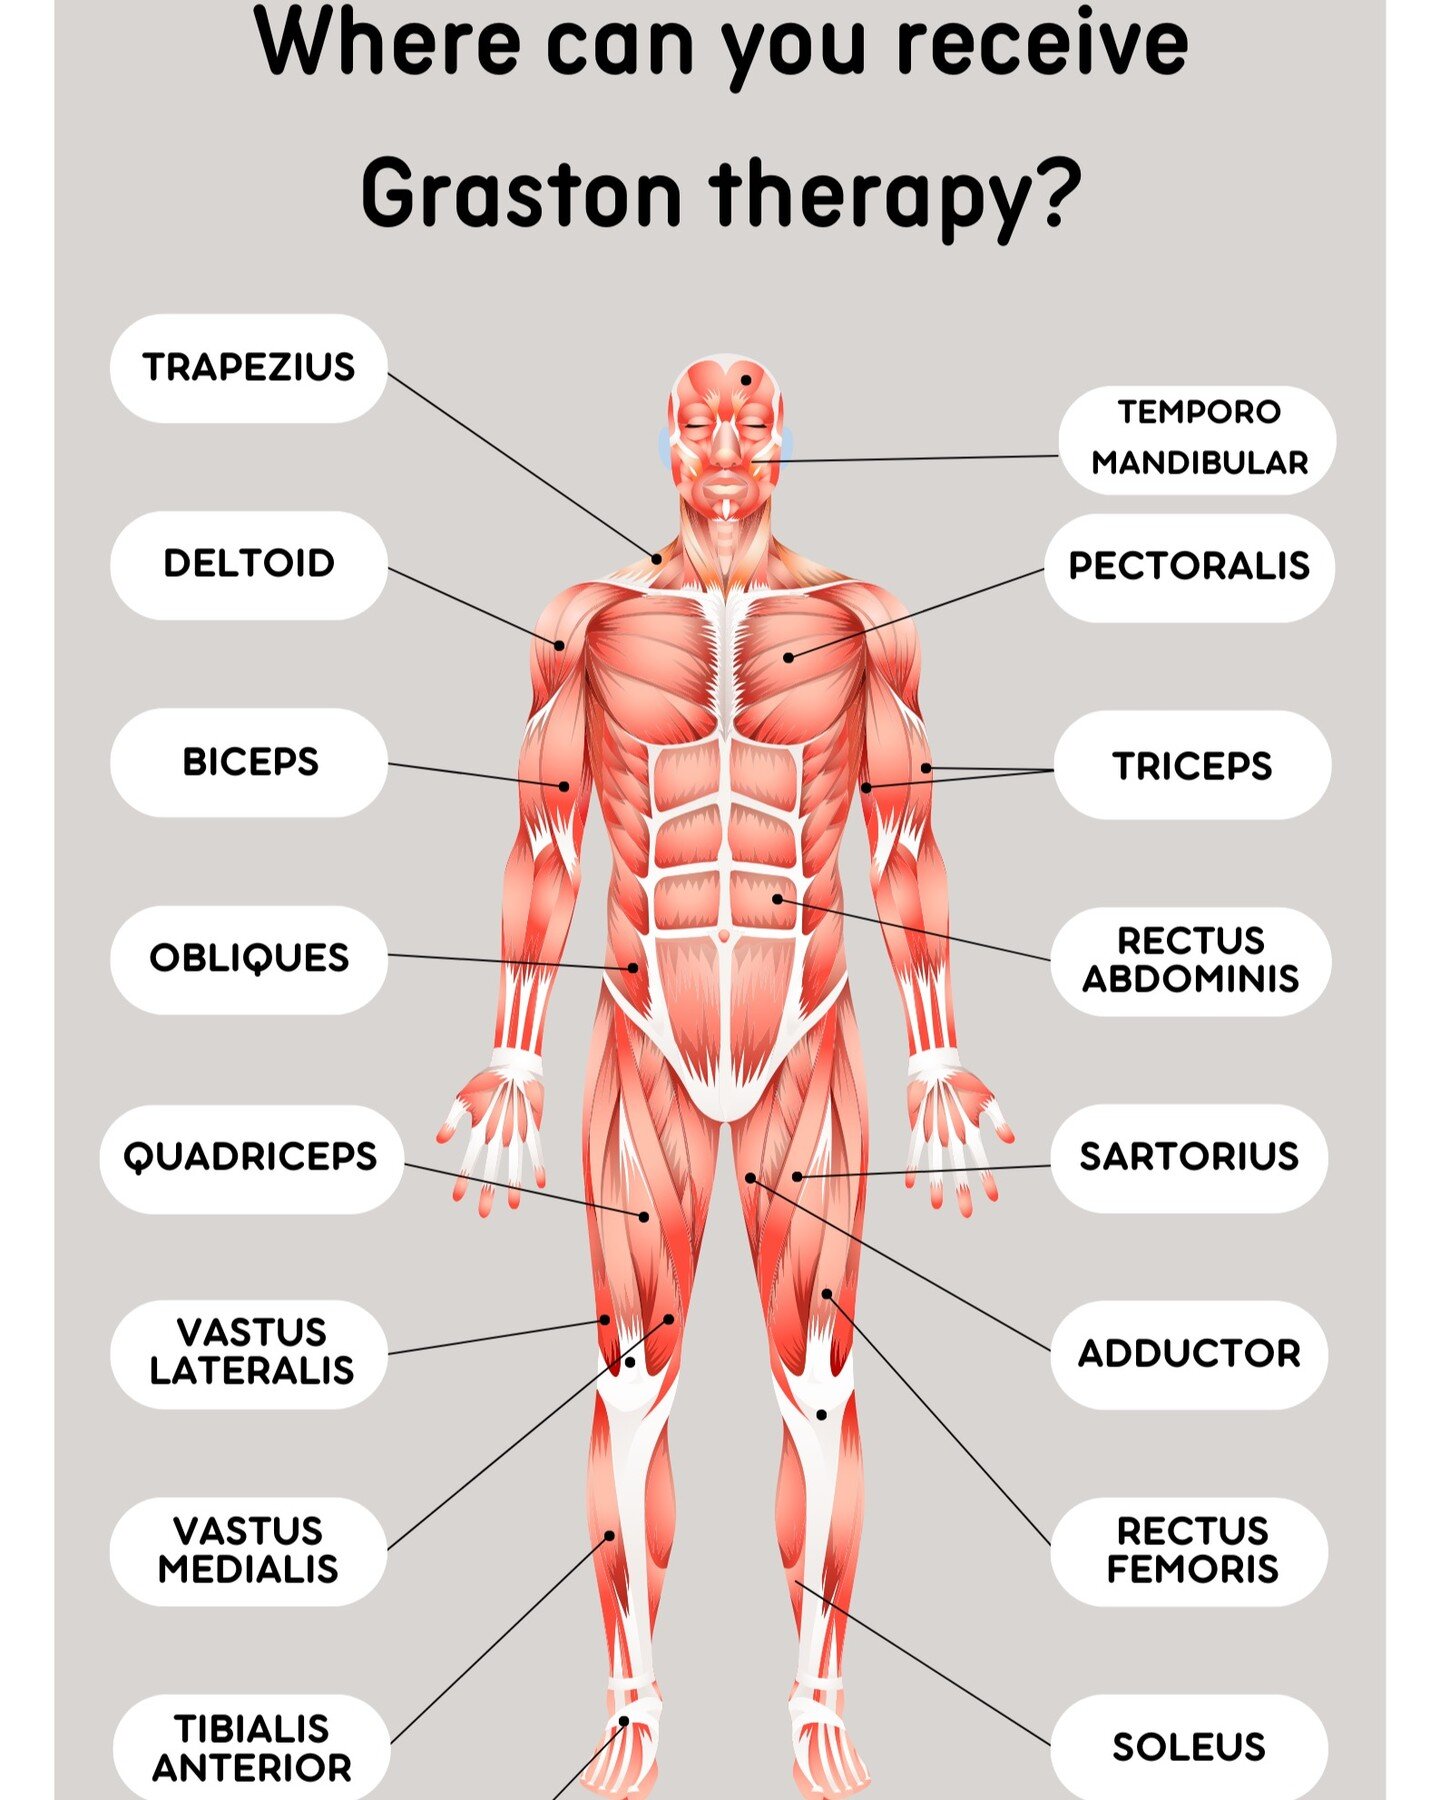 Sometimes it's confusing to know where you can receive Graston therapy, and sometimes it's tough to know if you even need Graston therapy! The Graston Technique helps out numerous stiff muscles that bring you dull aches or cramping - tackle TMJ, elbo